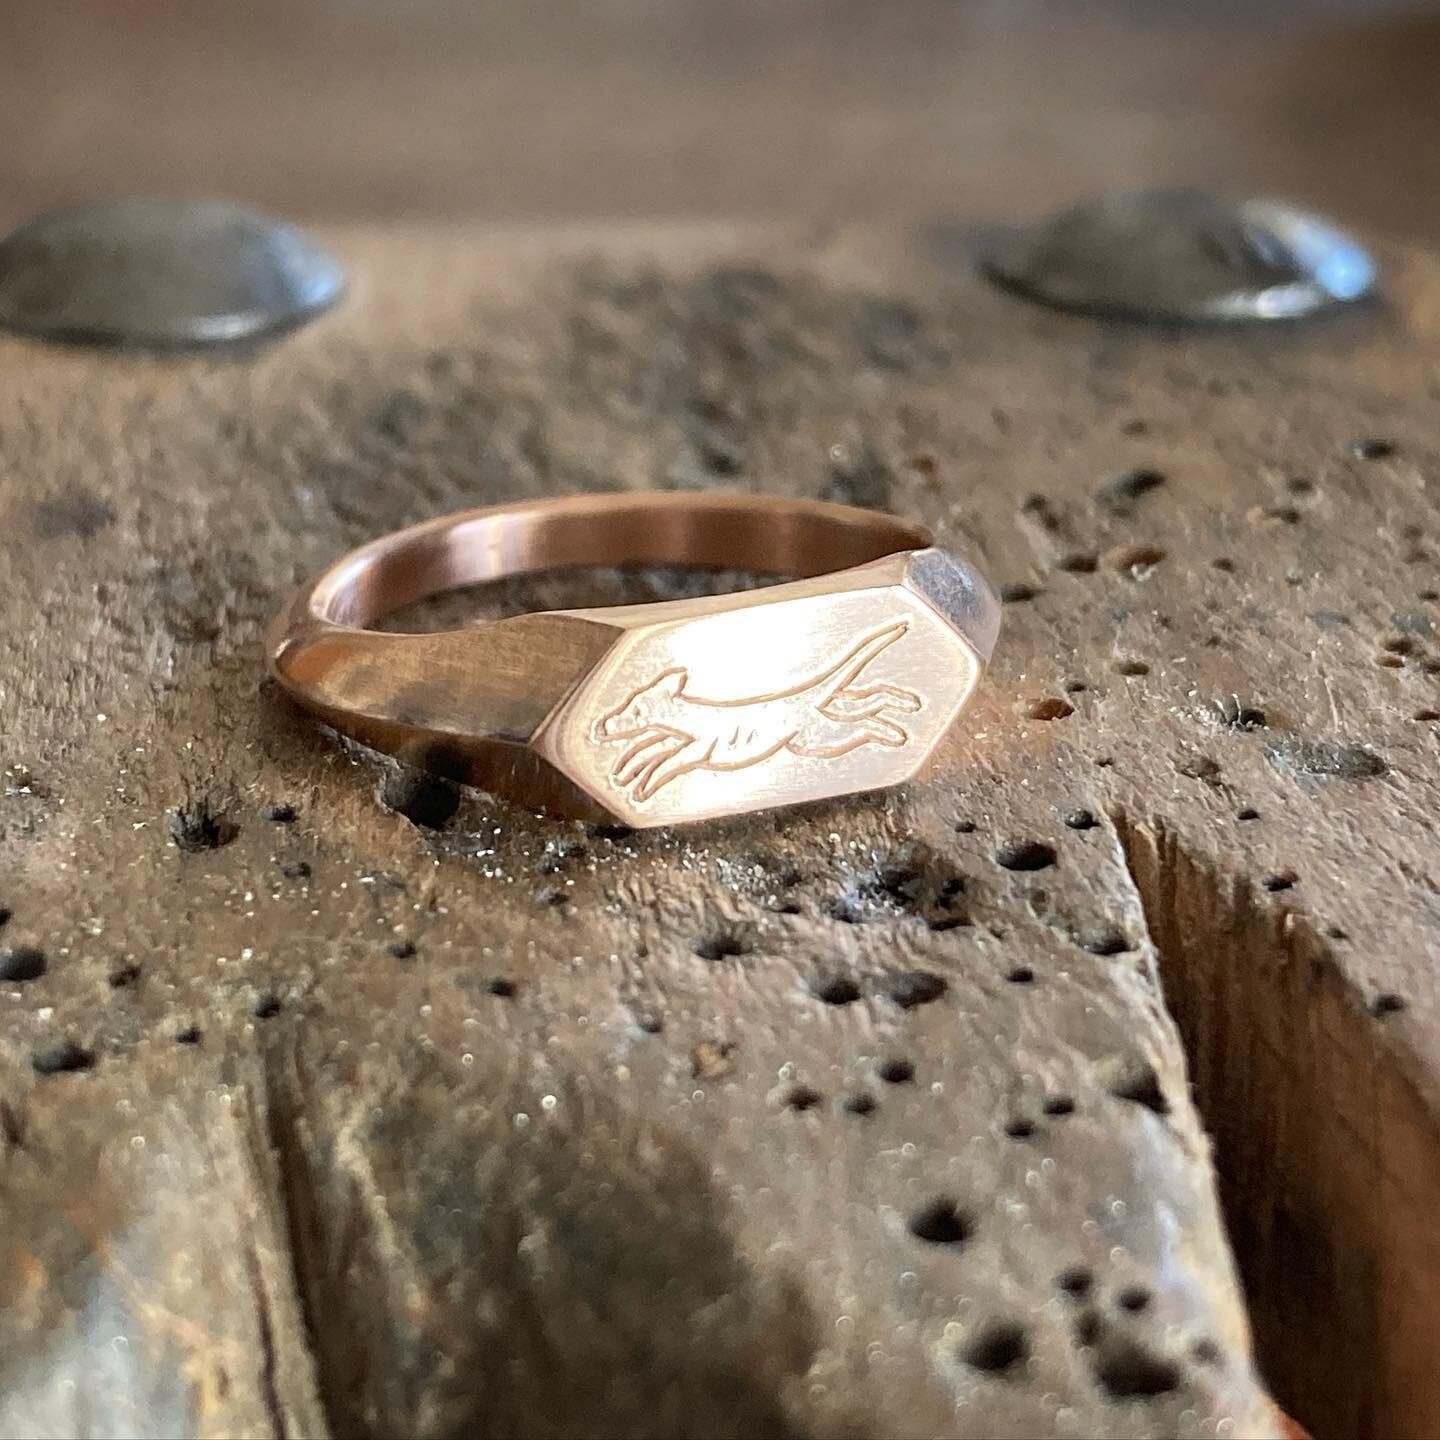 Little 9ct red gold hexagonal signet made for the lovely @donna___sarah to commemorate @homer_the_hound who sadly passed away last year. Originally carved from wax prior to sand casting some inherited gold, I love the shape and finish of this one. En